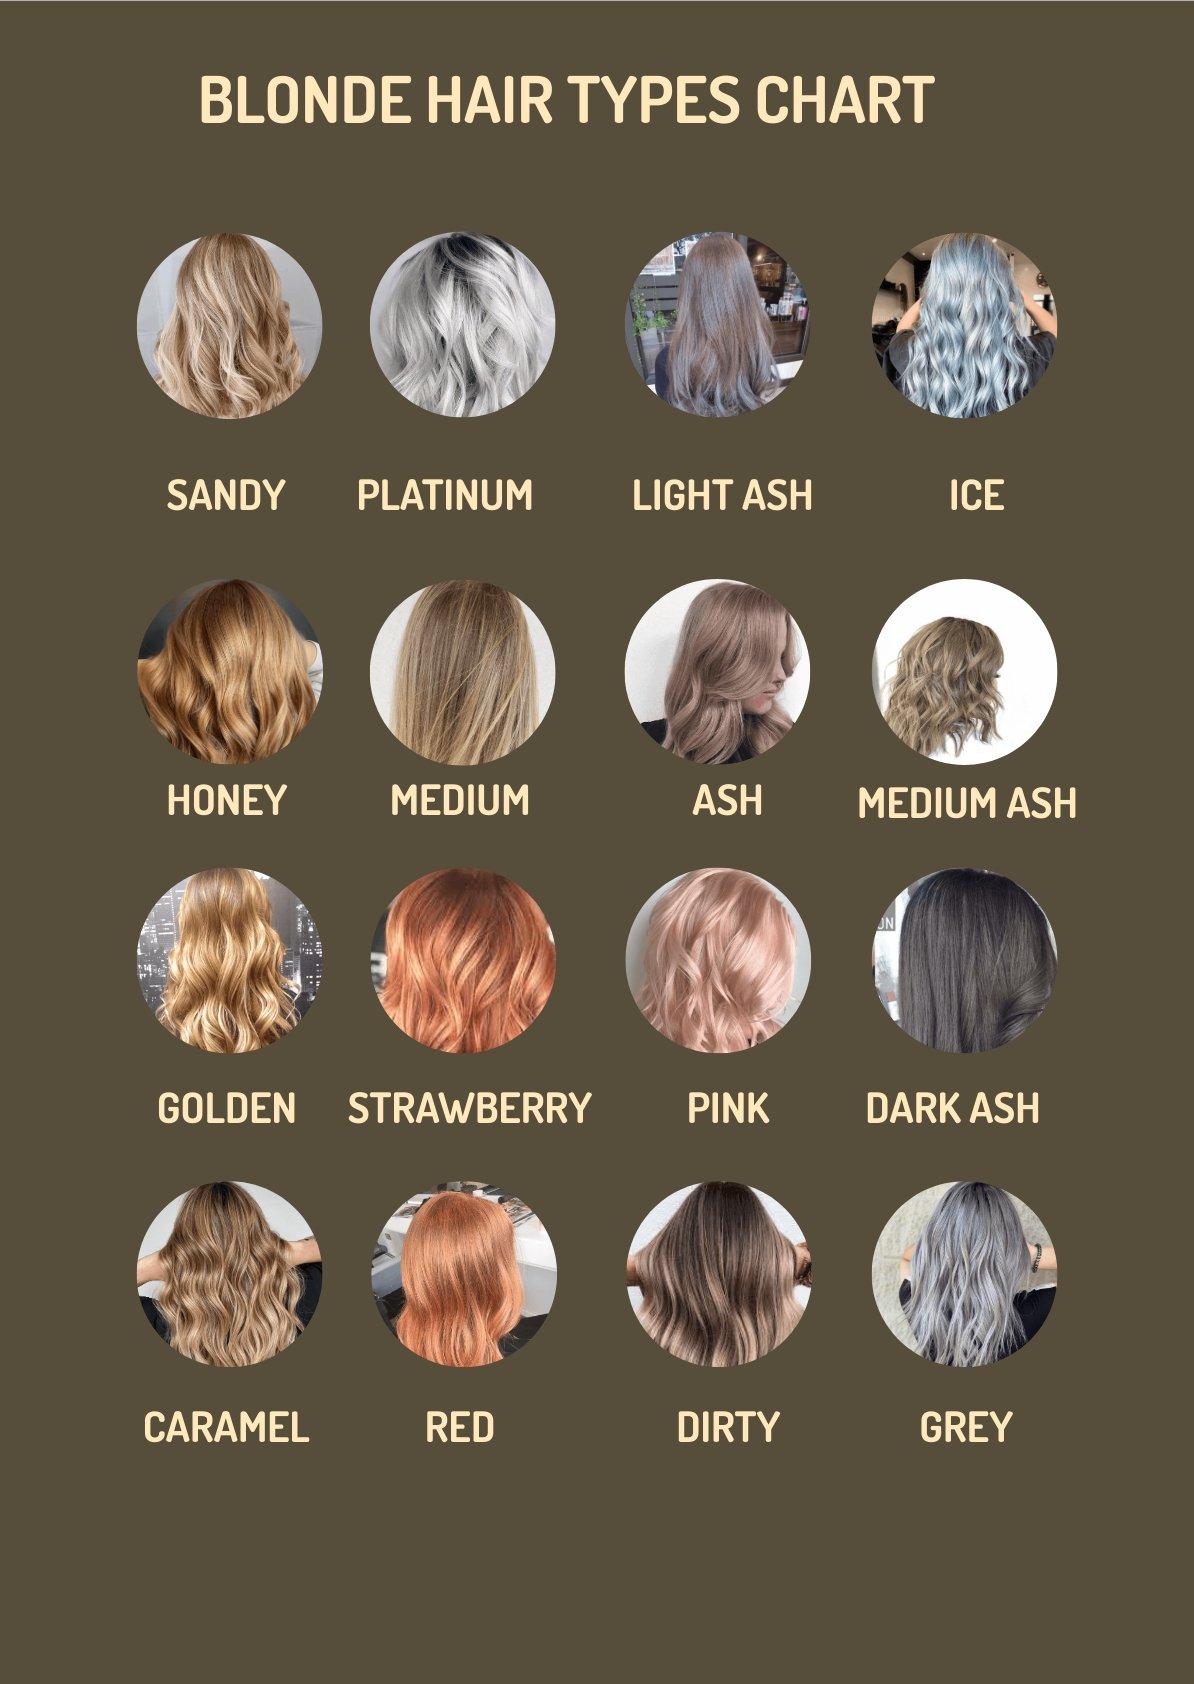 FREE Hair Type Chart Template - Download in Word, PDF, Illustrator ...